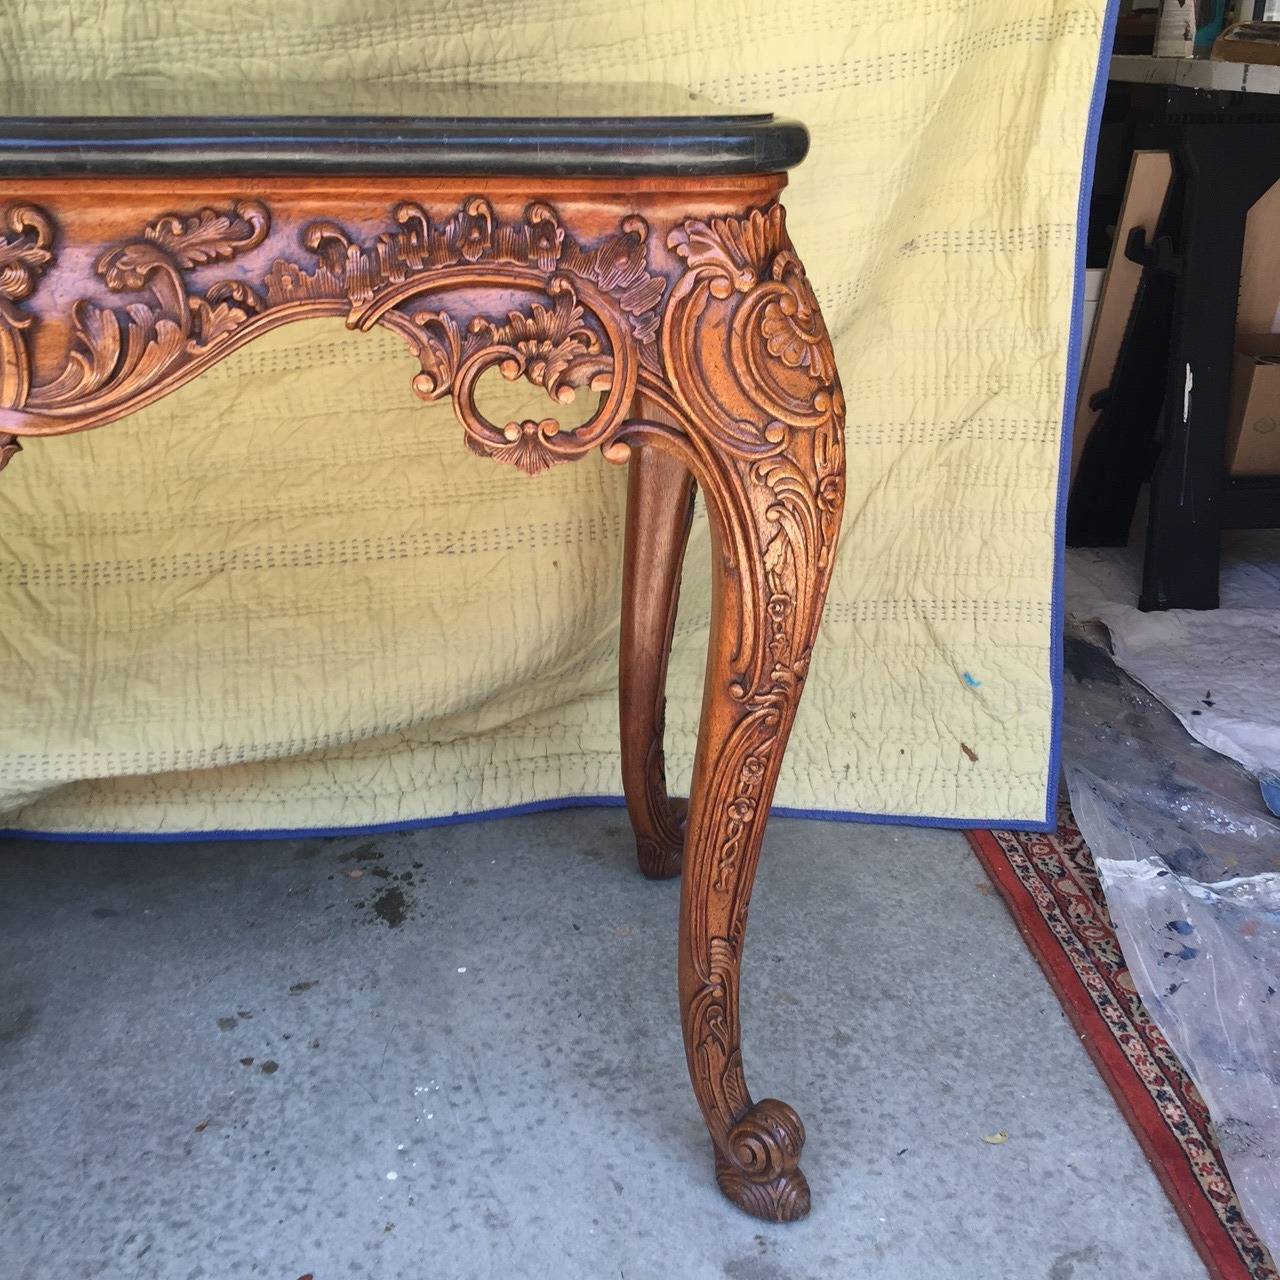 This gorgeous console table is in impeccable condition and is labeled Maitland Smith. The carving is detailed and perfect. The date of manufacture of this table is not known. It is marked Maitland Smith on the underside of the table. It is without